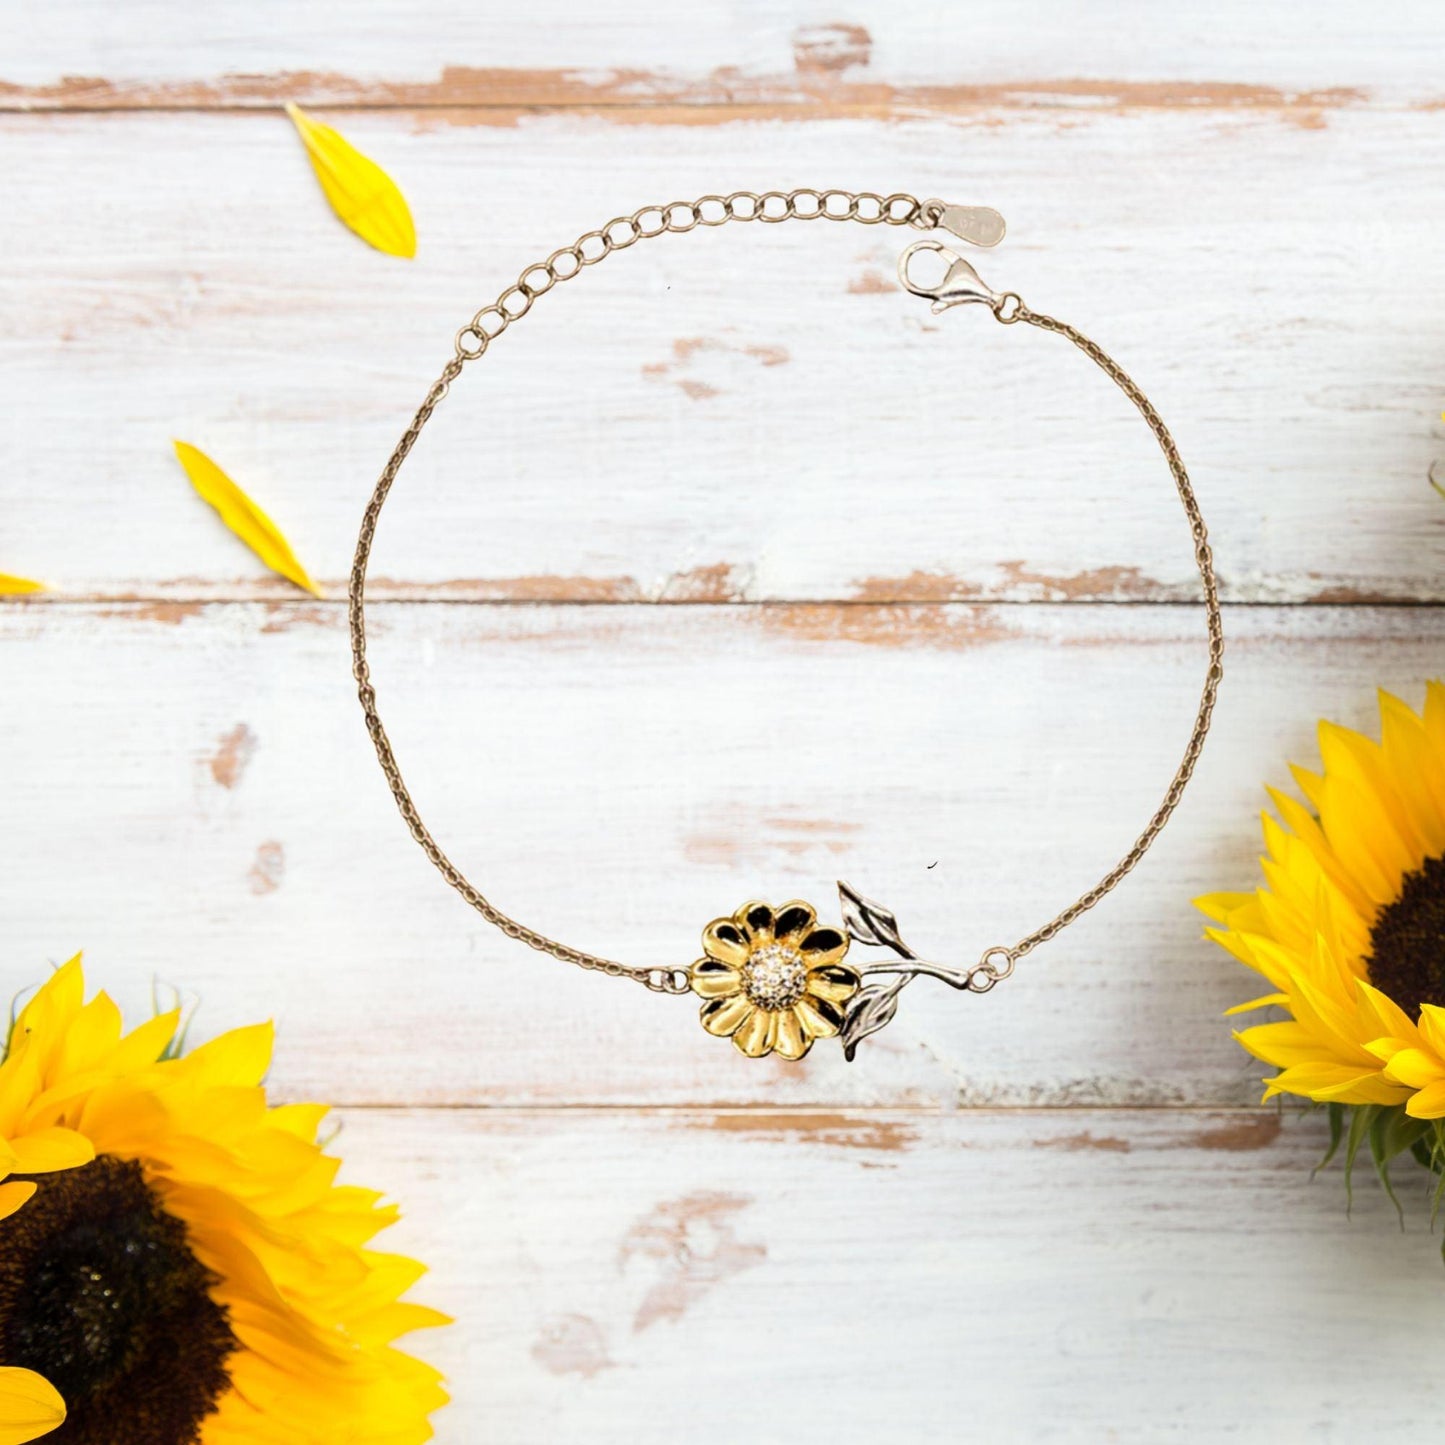 Mechanical Engineer Sunflower Bracelet - Thanks for being who you are - Birthday Christmas Jewelry Gifts Coworkers Colleague Boss - Mallard Moon Gift Shop